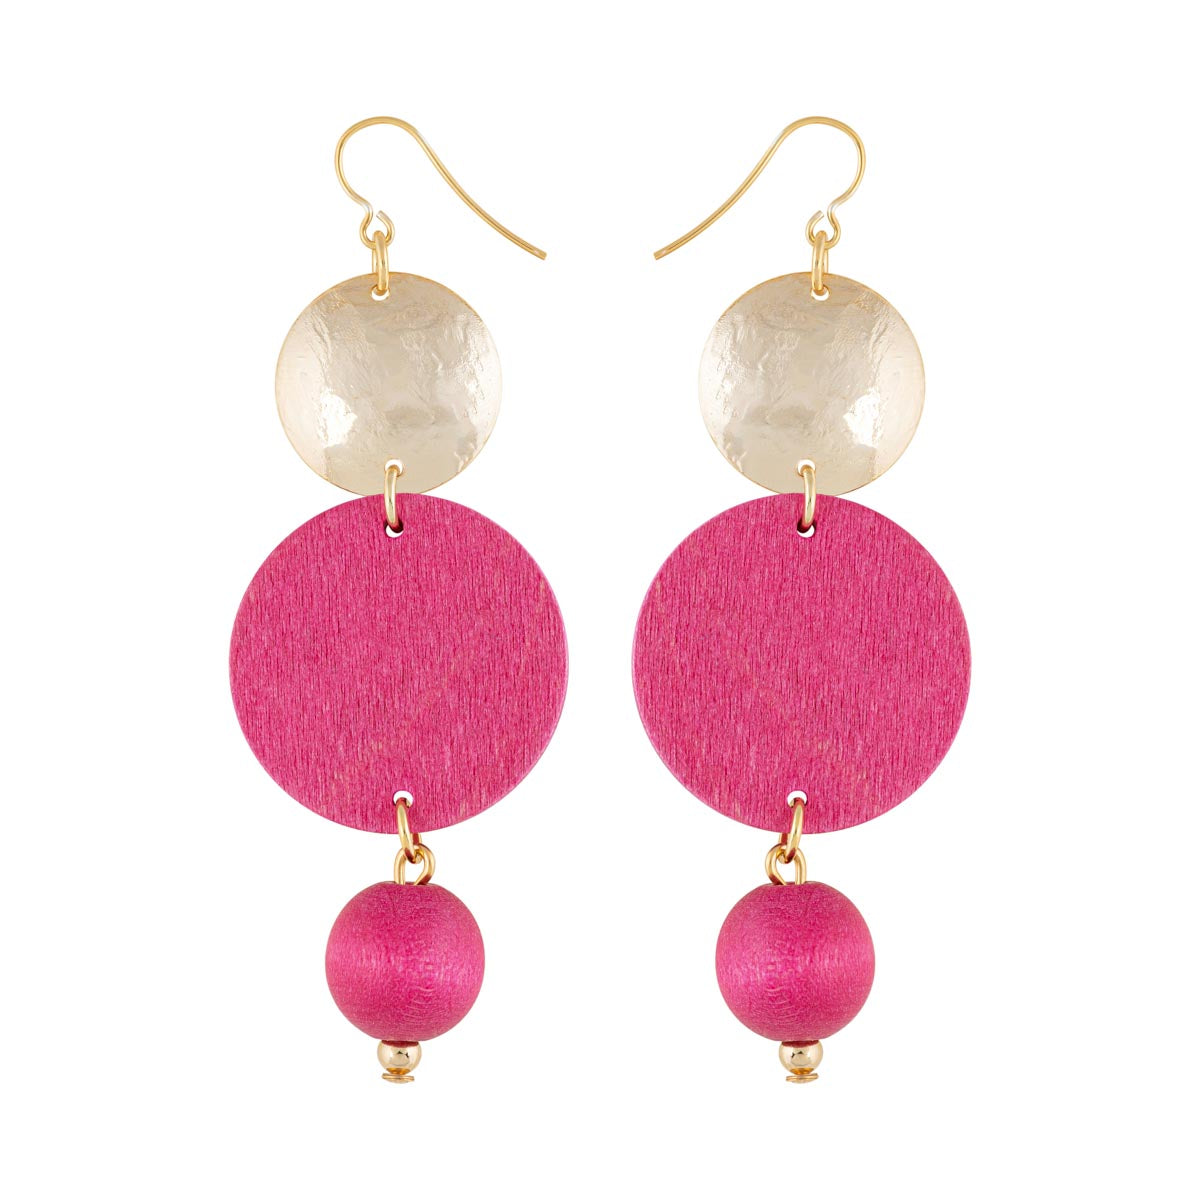 Ilta earrings, pink and gold